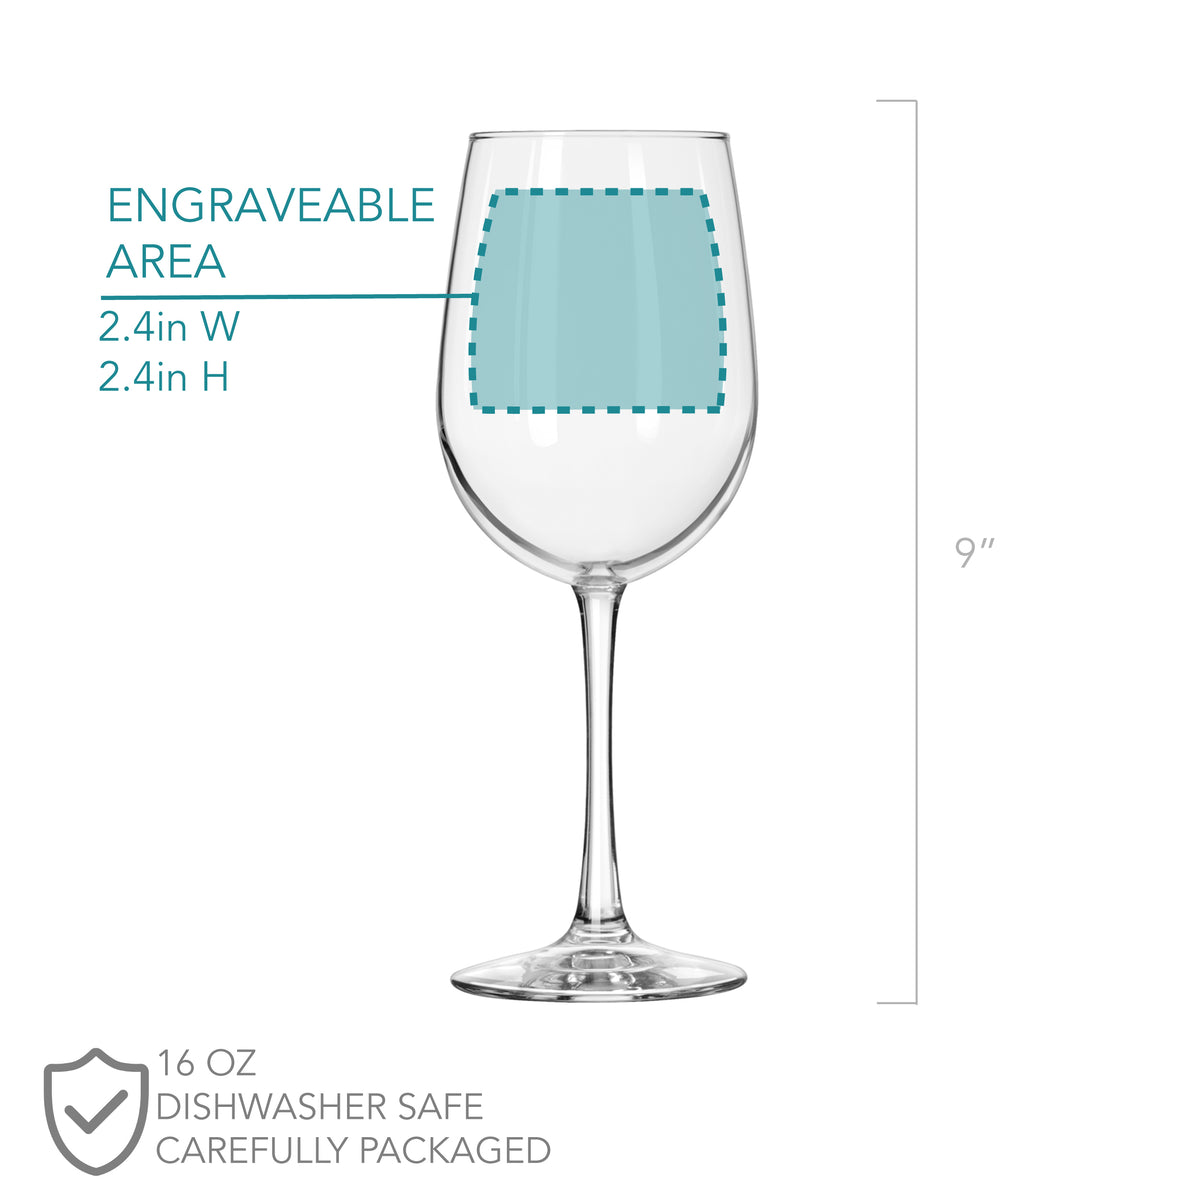 21st Birthday Champagne Flute - Design: 21 - Everything Etched